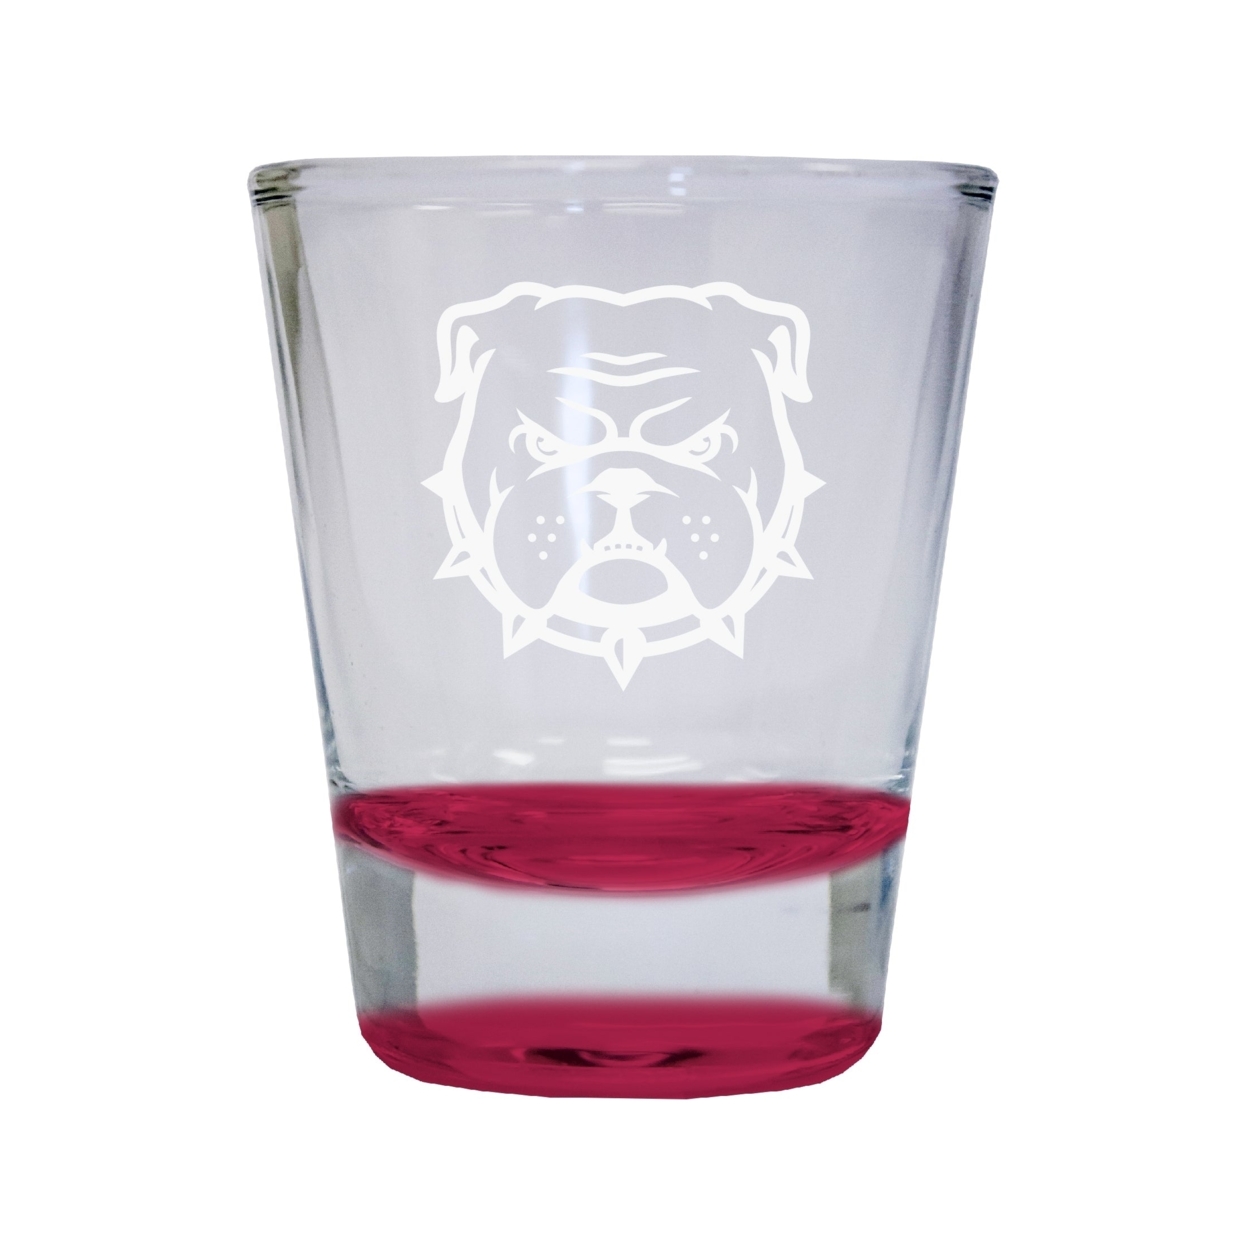 Truman State University Etched Round Shot Glass 2 Oz Red